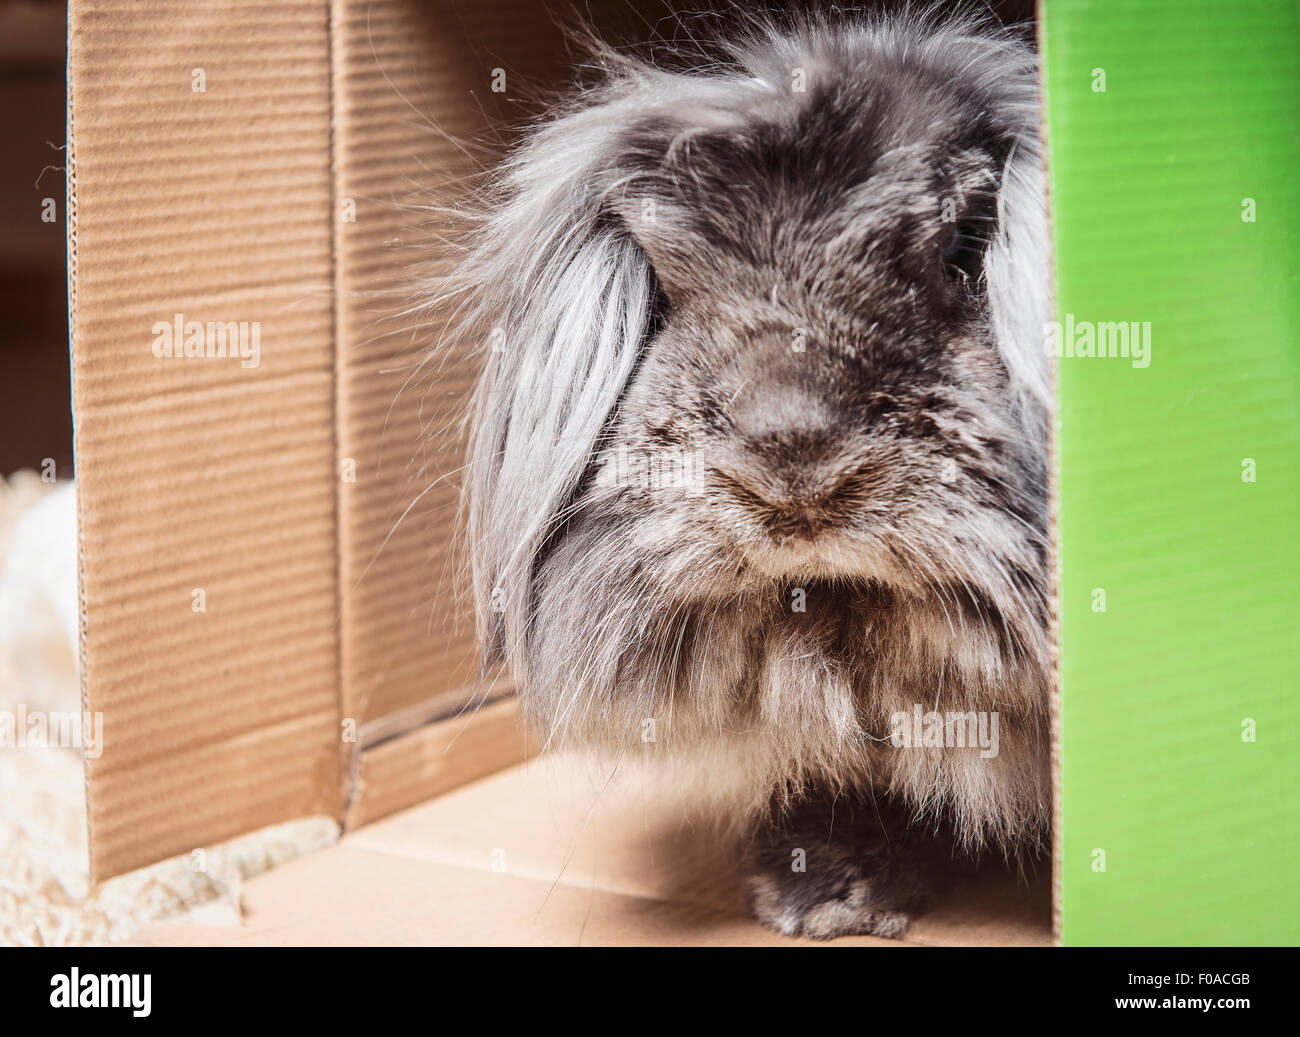 Fluffy rabbit peering out of cardboard box Stock Photo